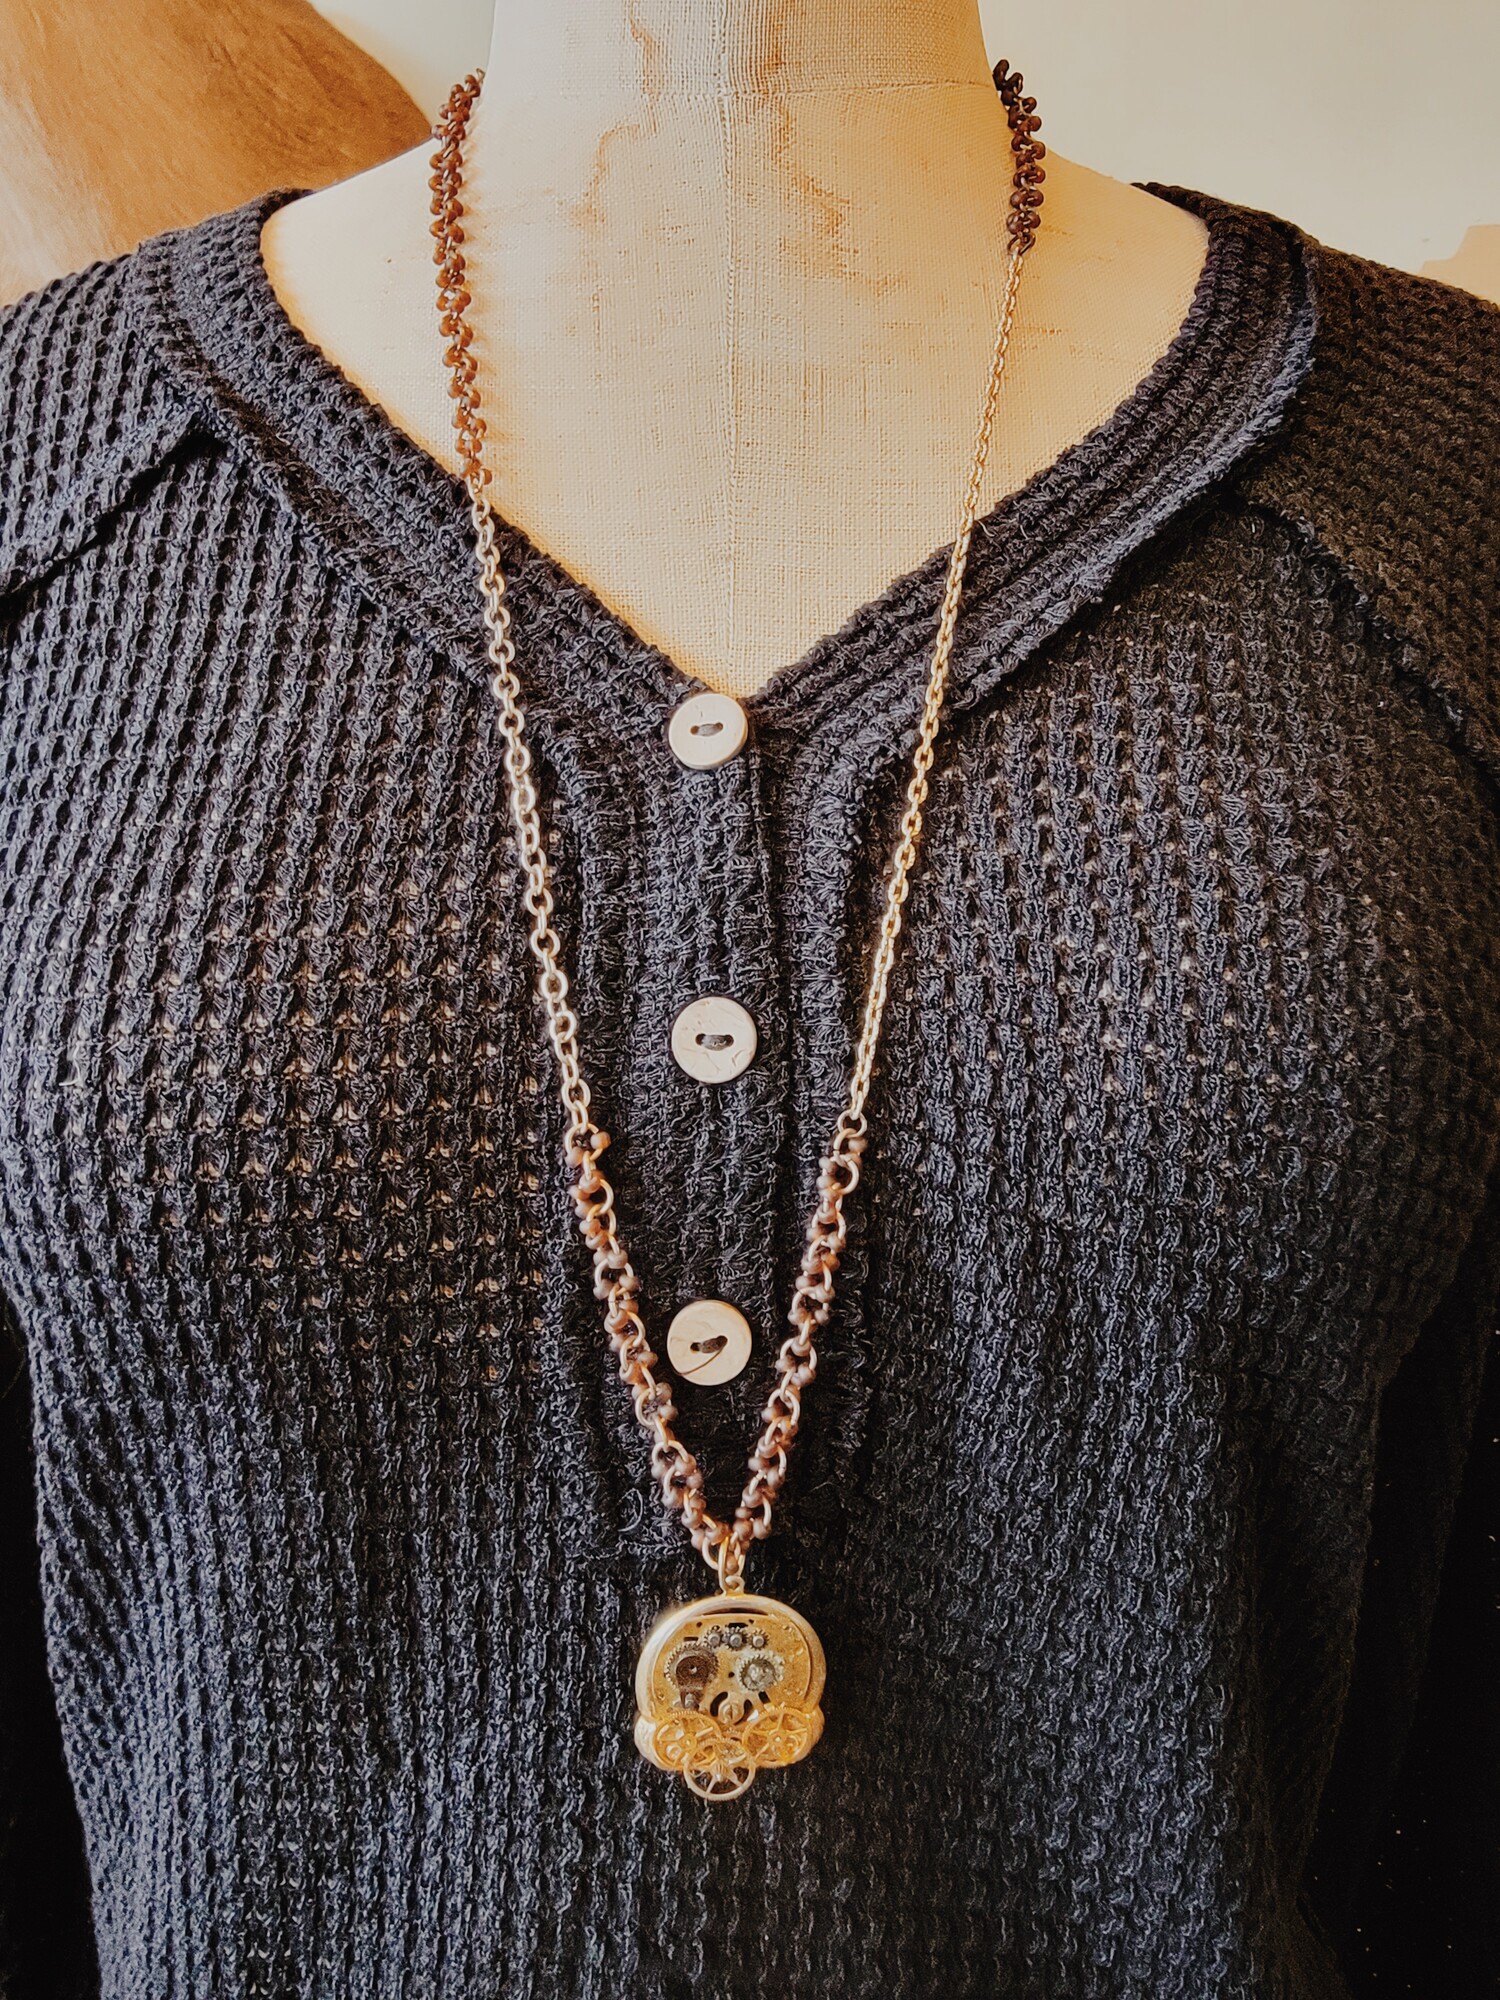 This adorable necklace is on a 32 inch chain with beads strung along portions. Its pendant is a collage of watch parts and faces!